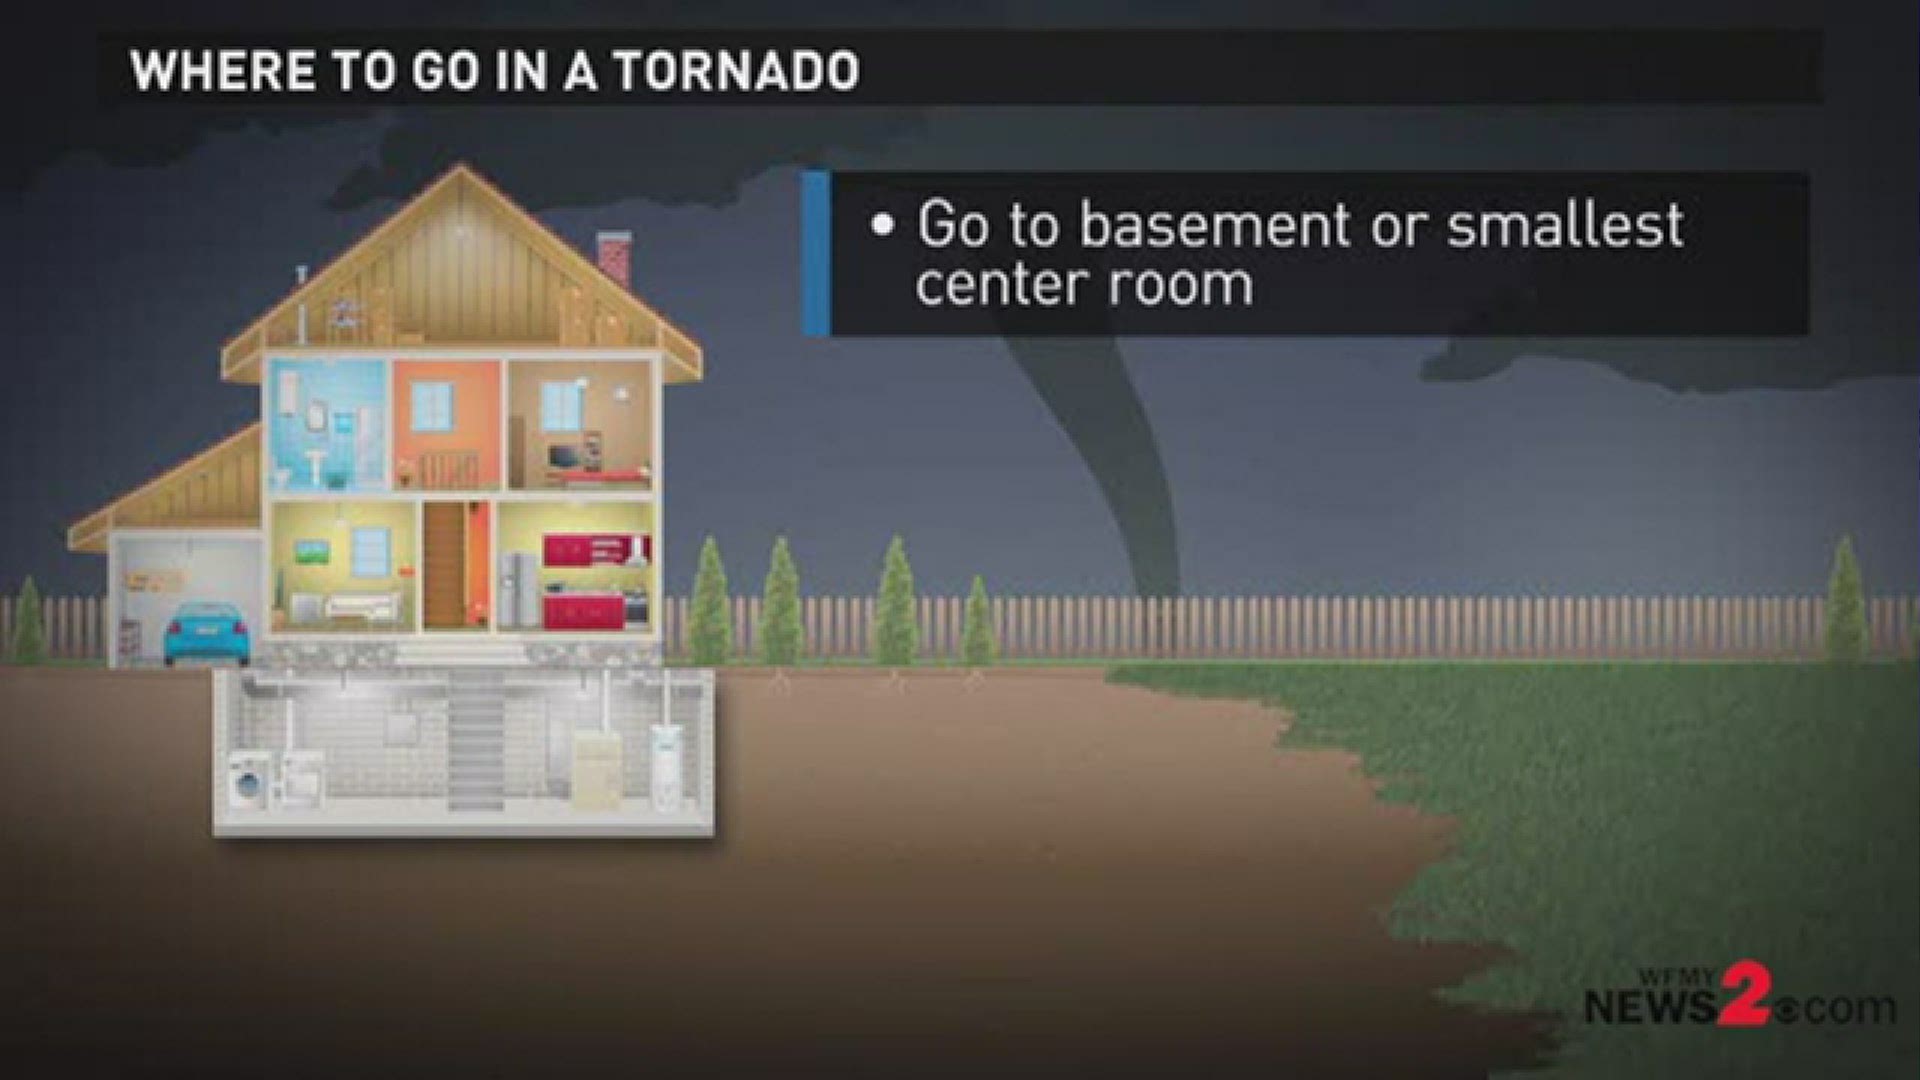 Find out how to protect yourself and your family during a tornado.